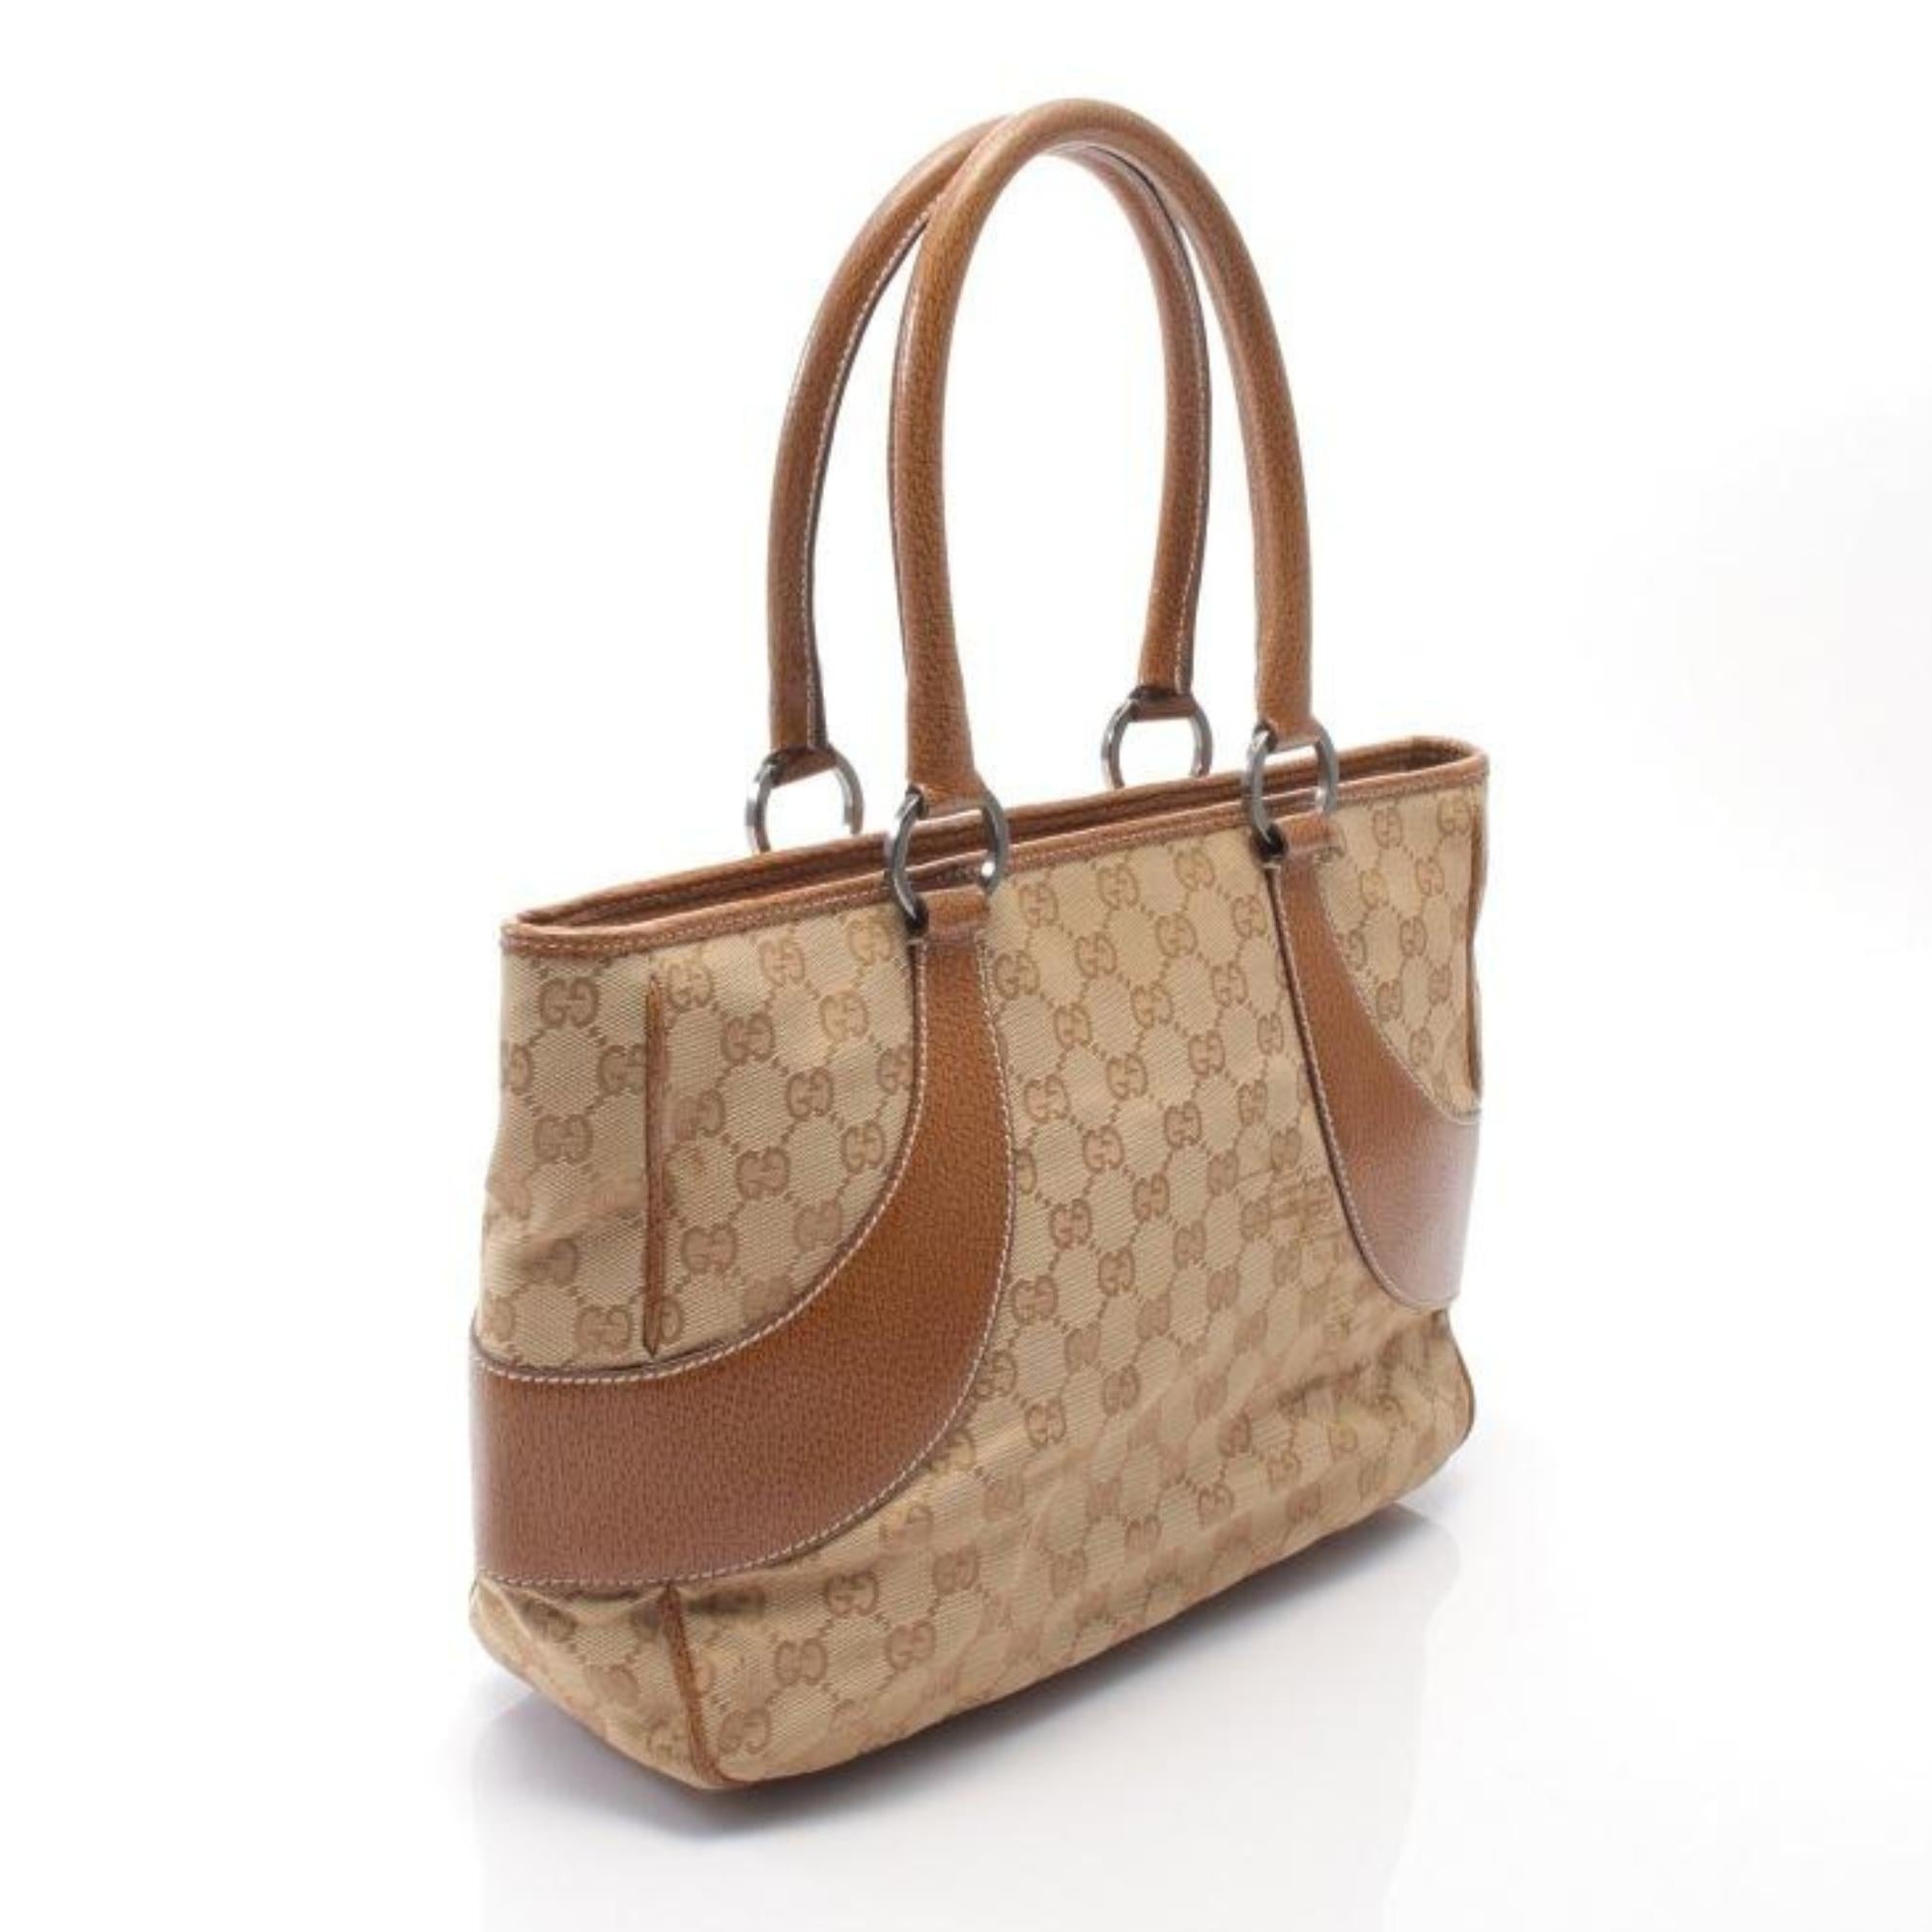 This tote is finely constructed of Gucci GG monogram canvas in beige. The bag features beige leather trim, dual rolled leather top handles, dark silver hardware and top zip closure. The top opens to a brown fabric interior with a zipper